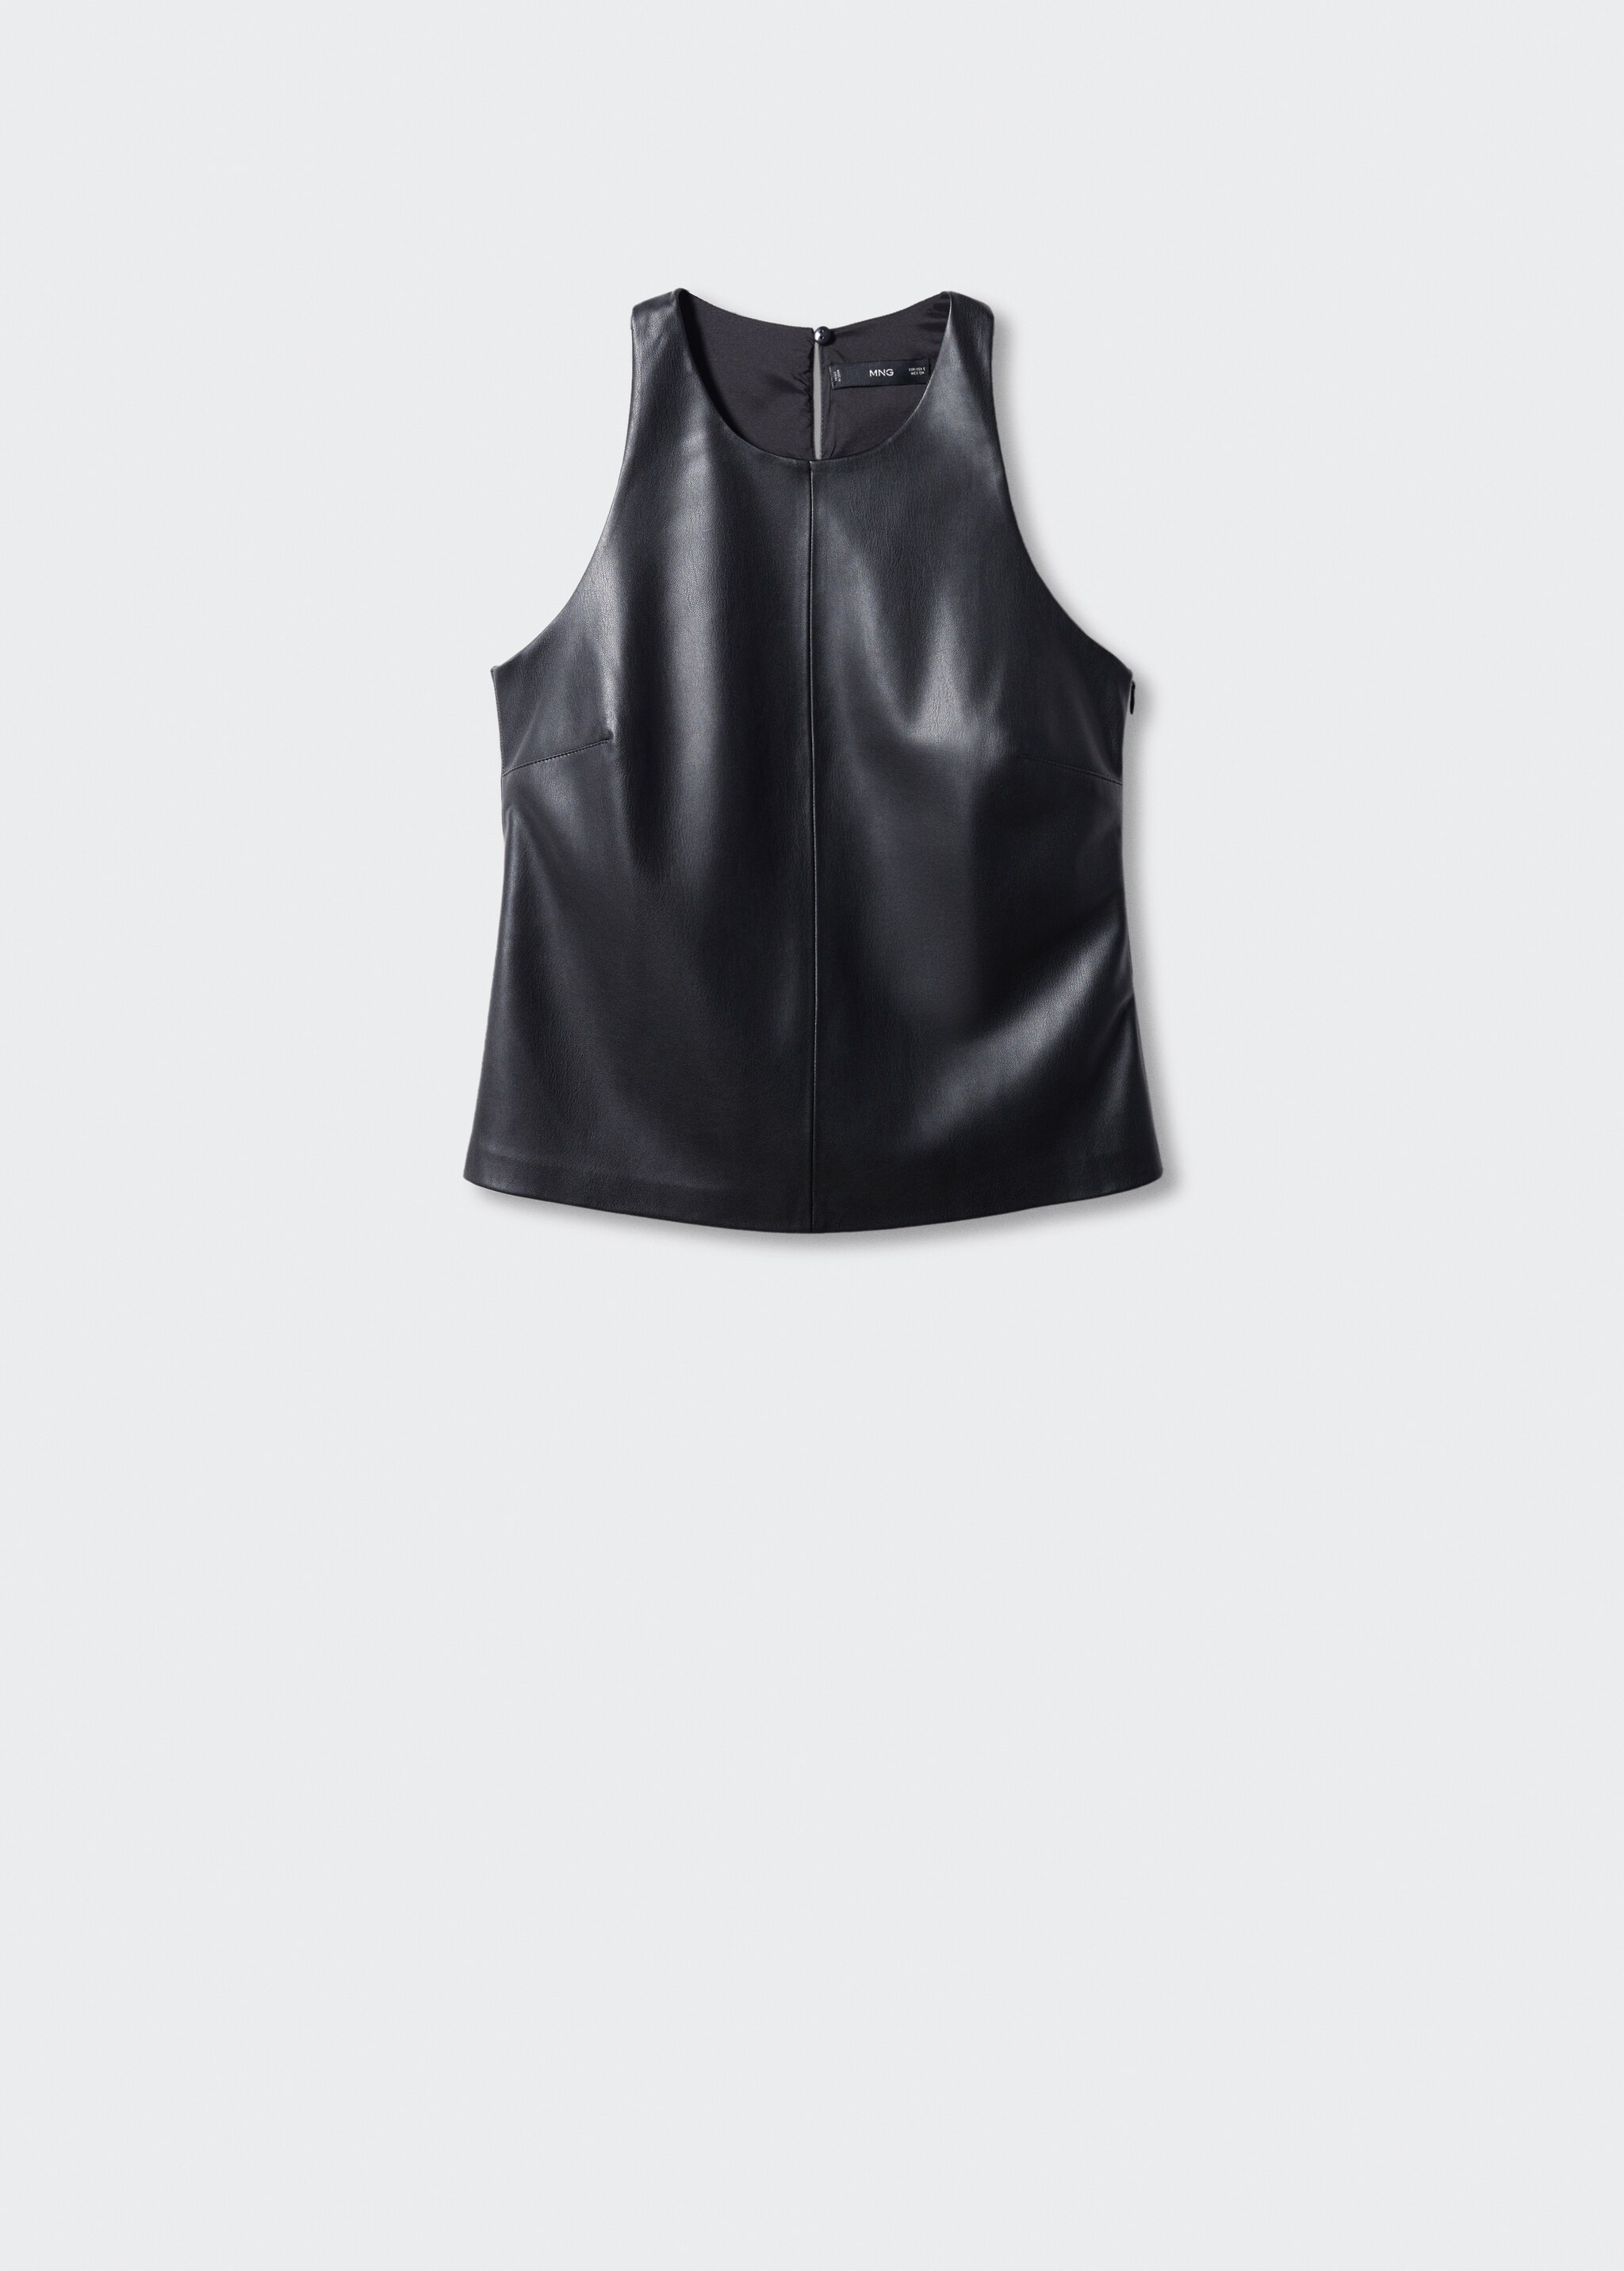 Leather-effect top - Article without model